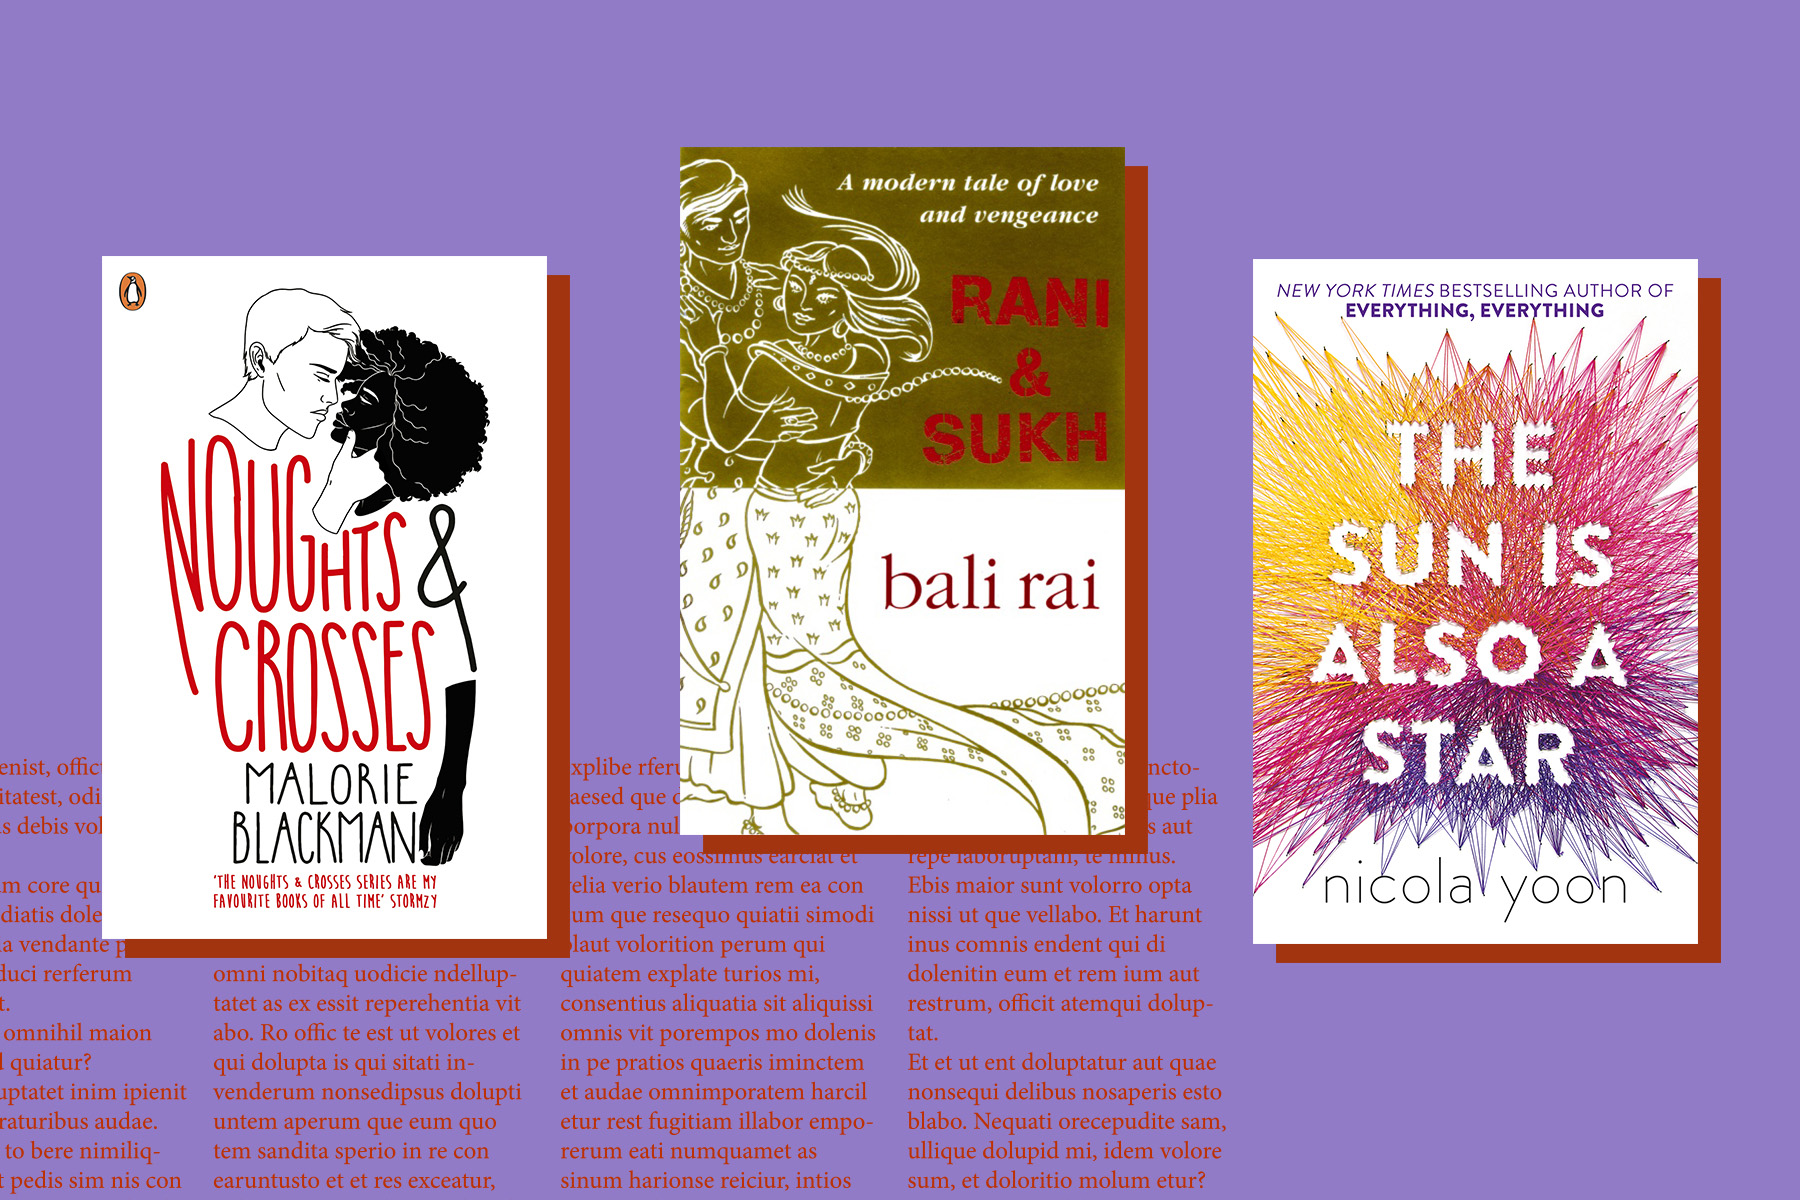 The covers of Noughts and Crosses, Rani and Sukh and The Sun is Also a Star overlaid on a purple background